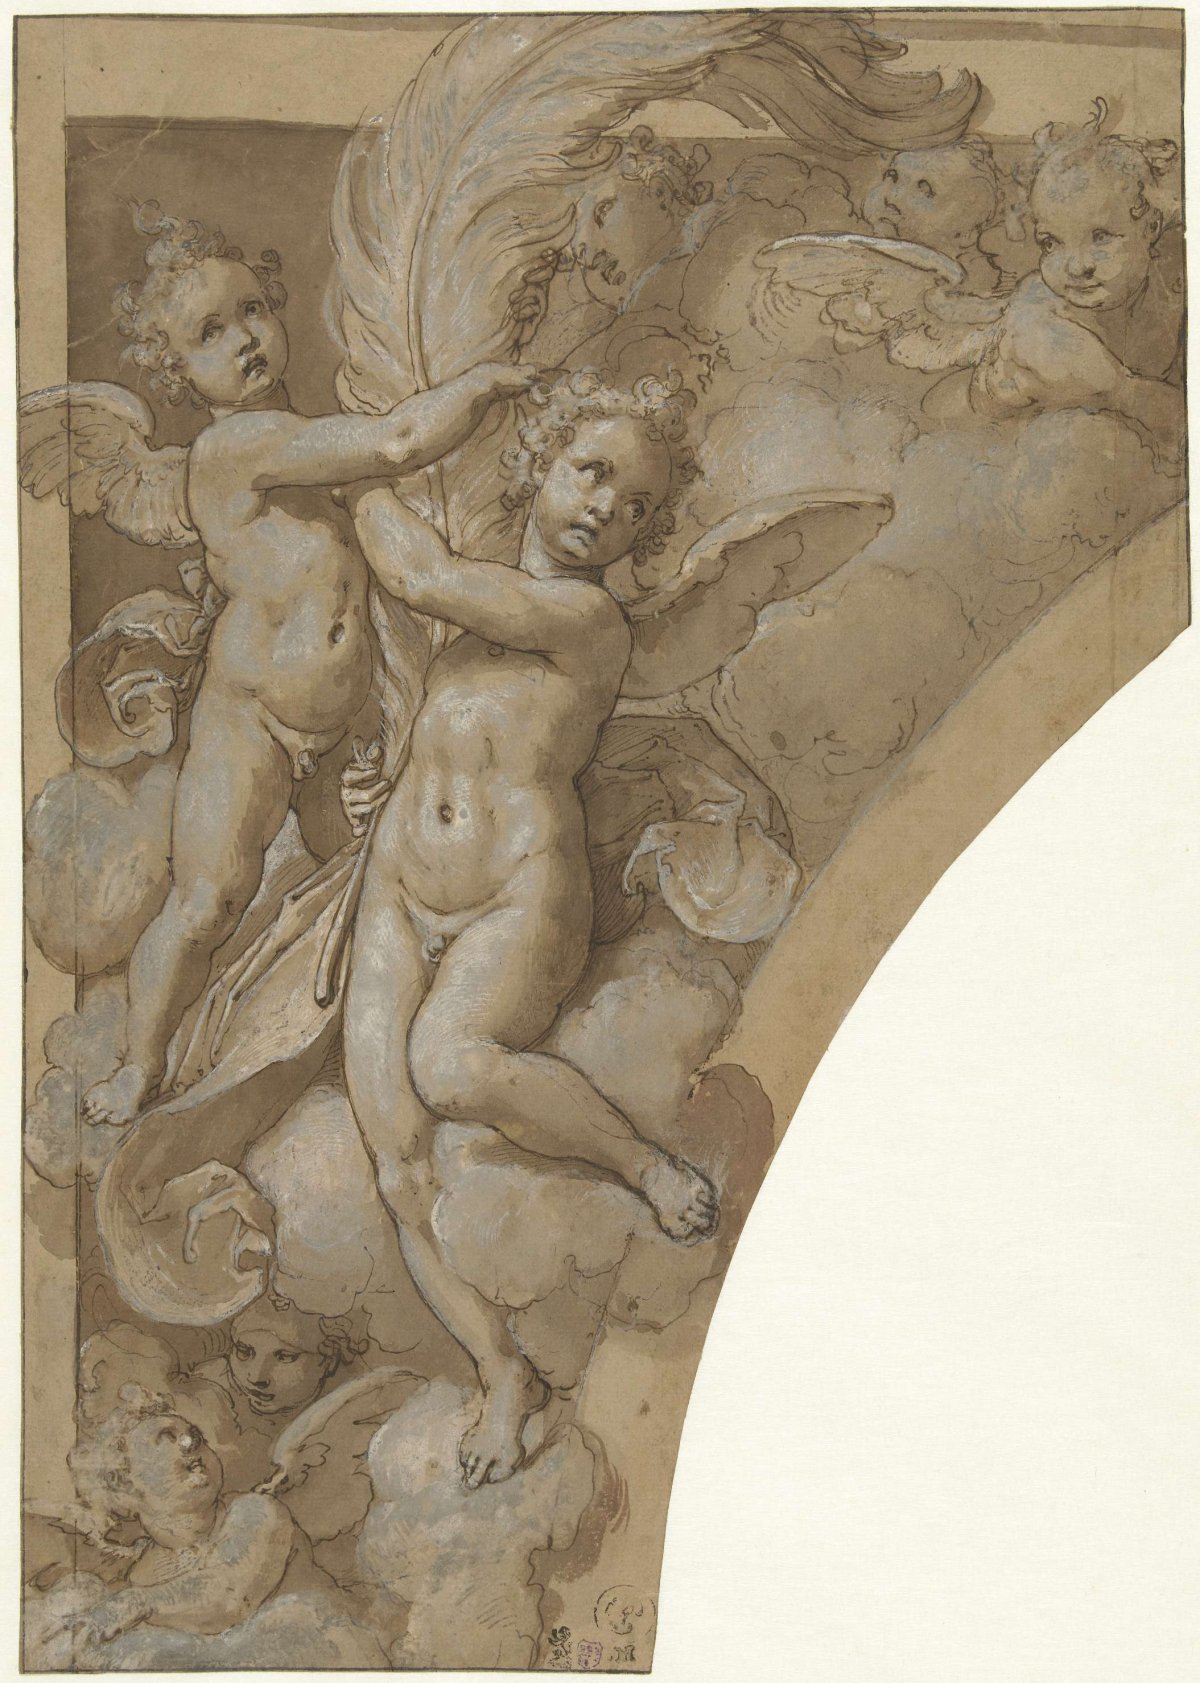 Flight of Angels, Two Holding a Large Feather, Taddeo Zuccaro, c. 1556 - c. 1558